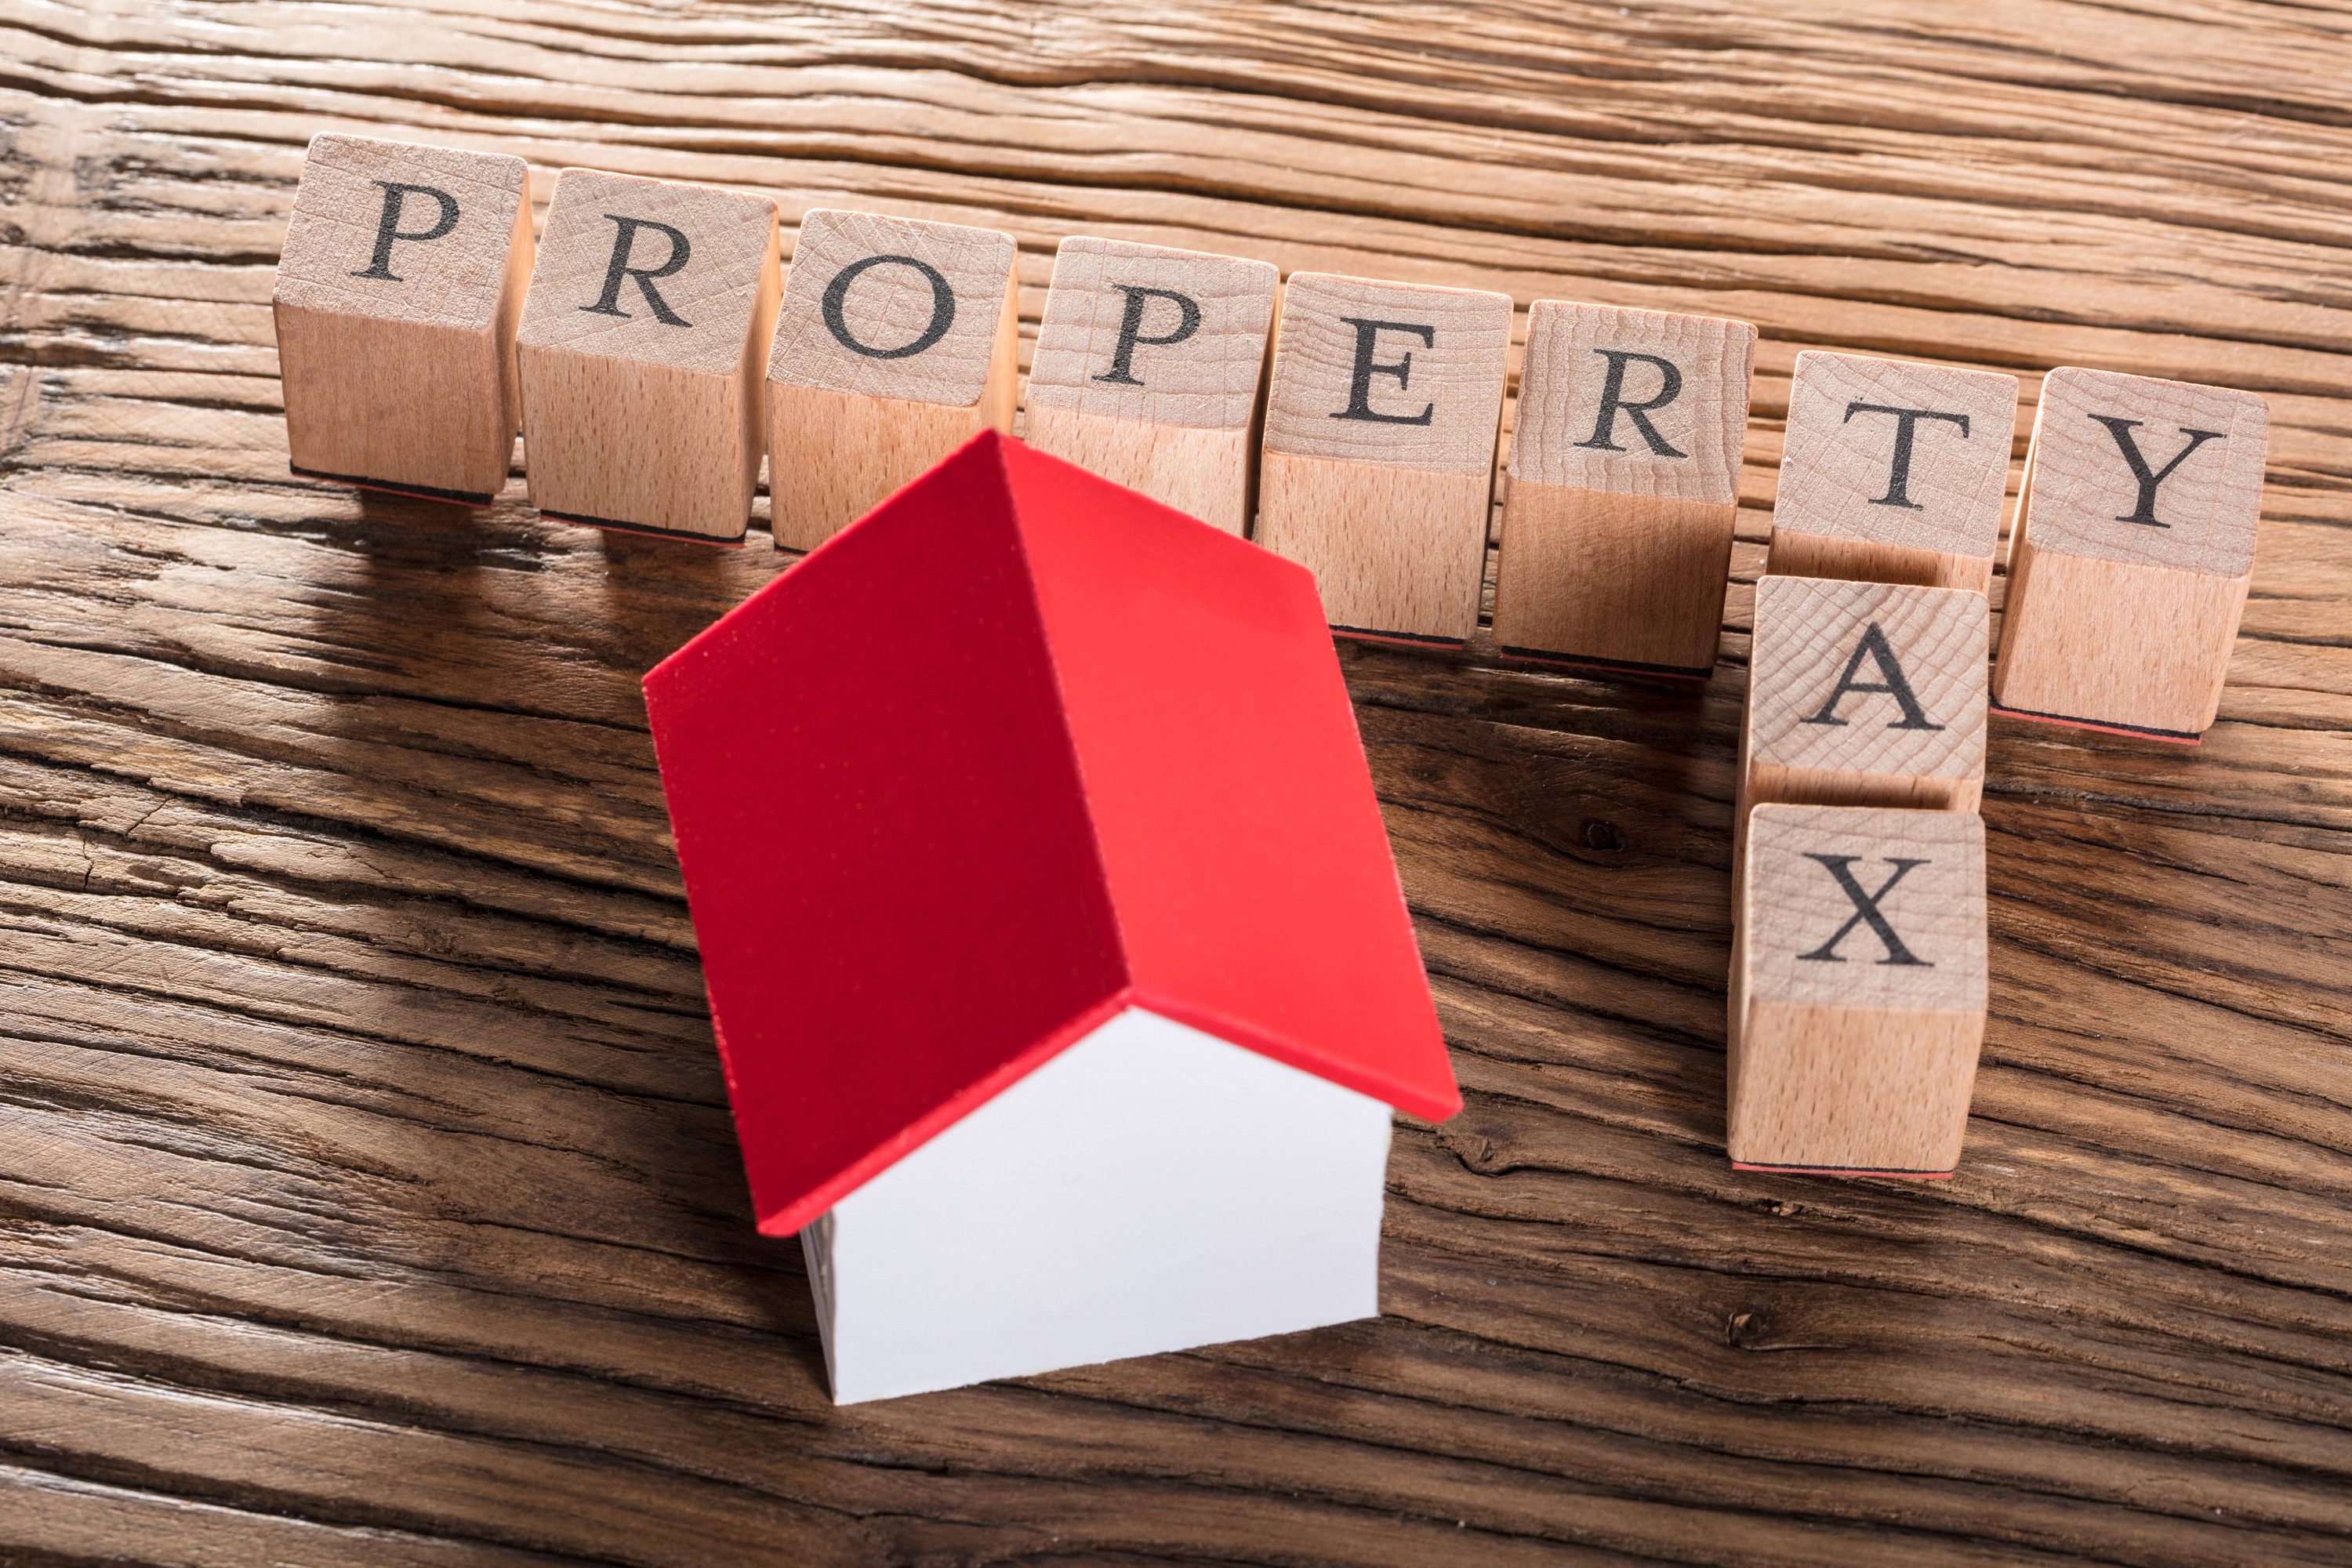 How would a home remodel impact my property taxes?